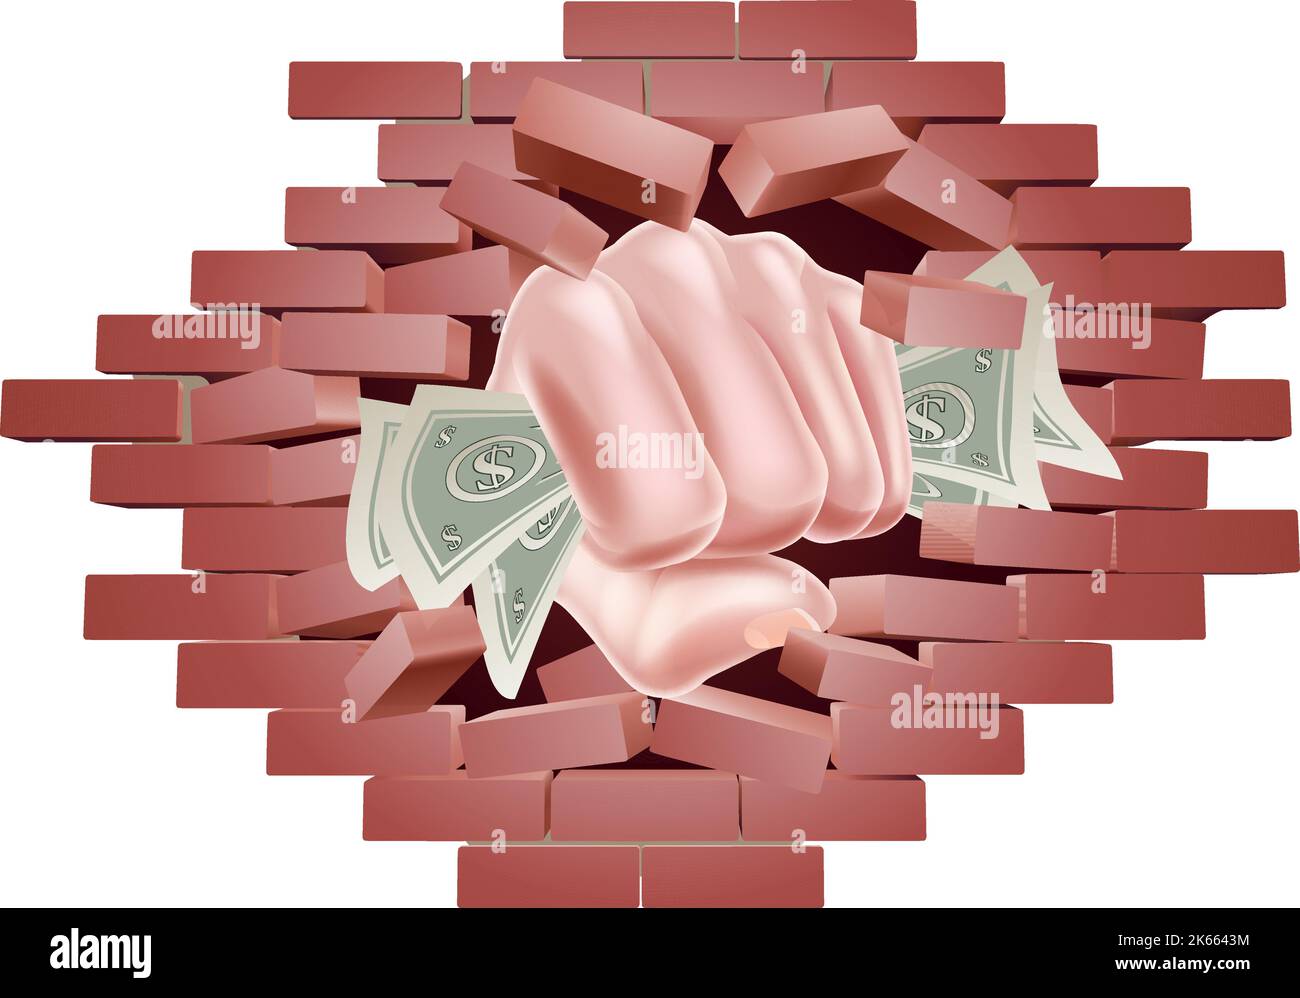 Hand Fist Holding Cash Money Punching Wall Stock Vector